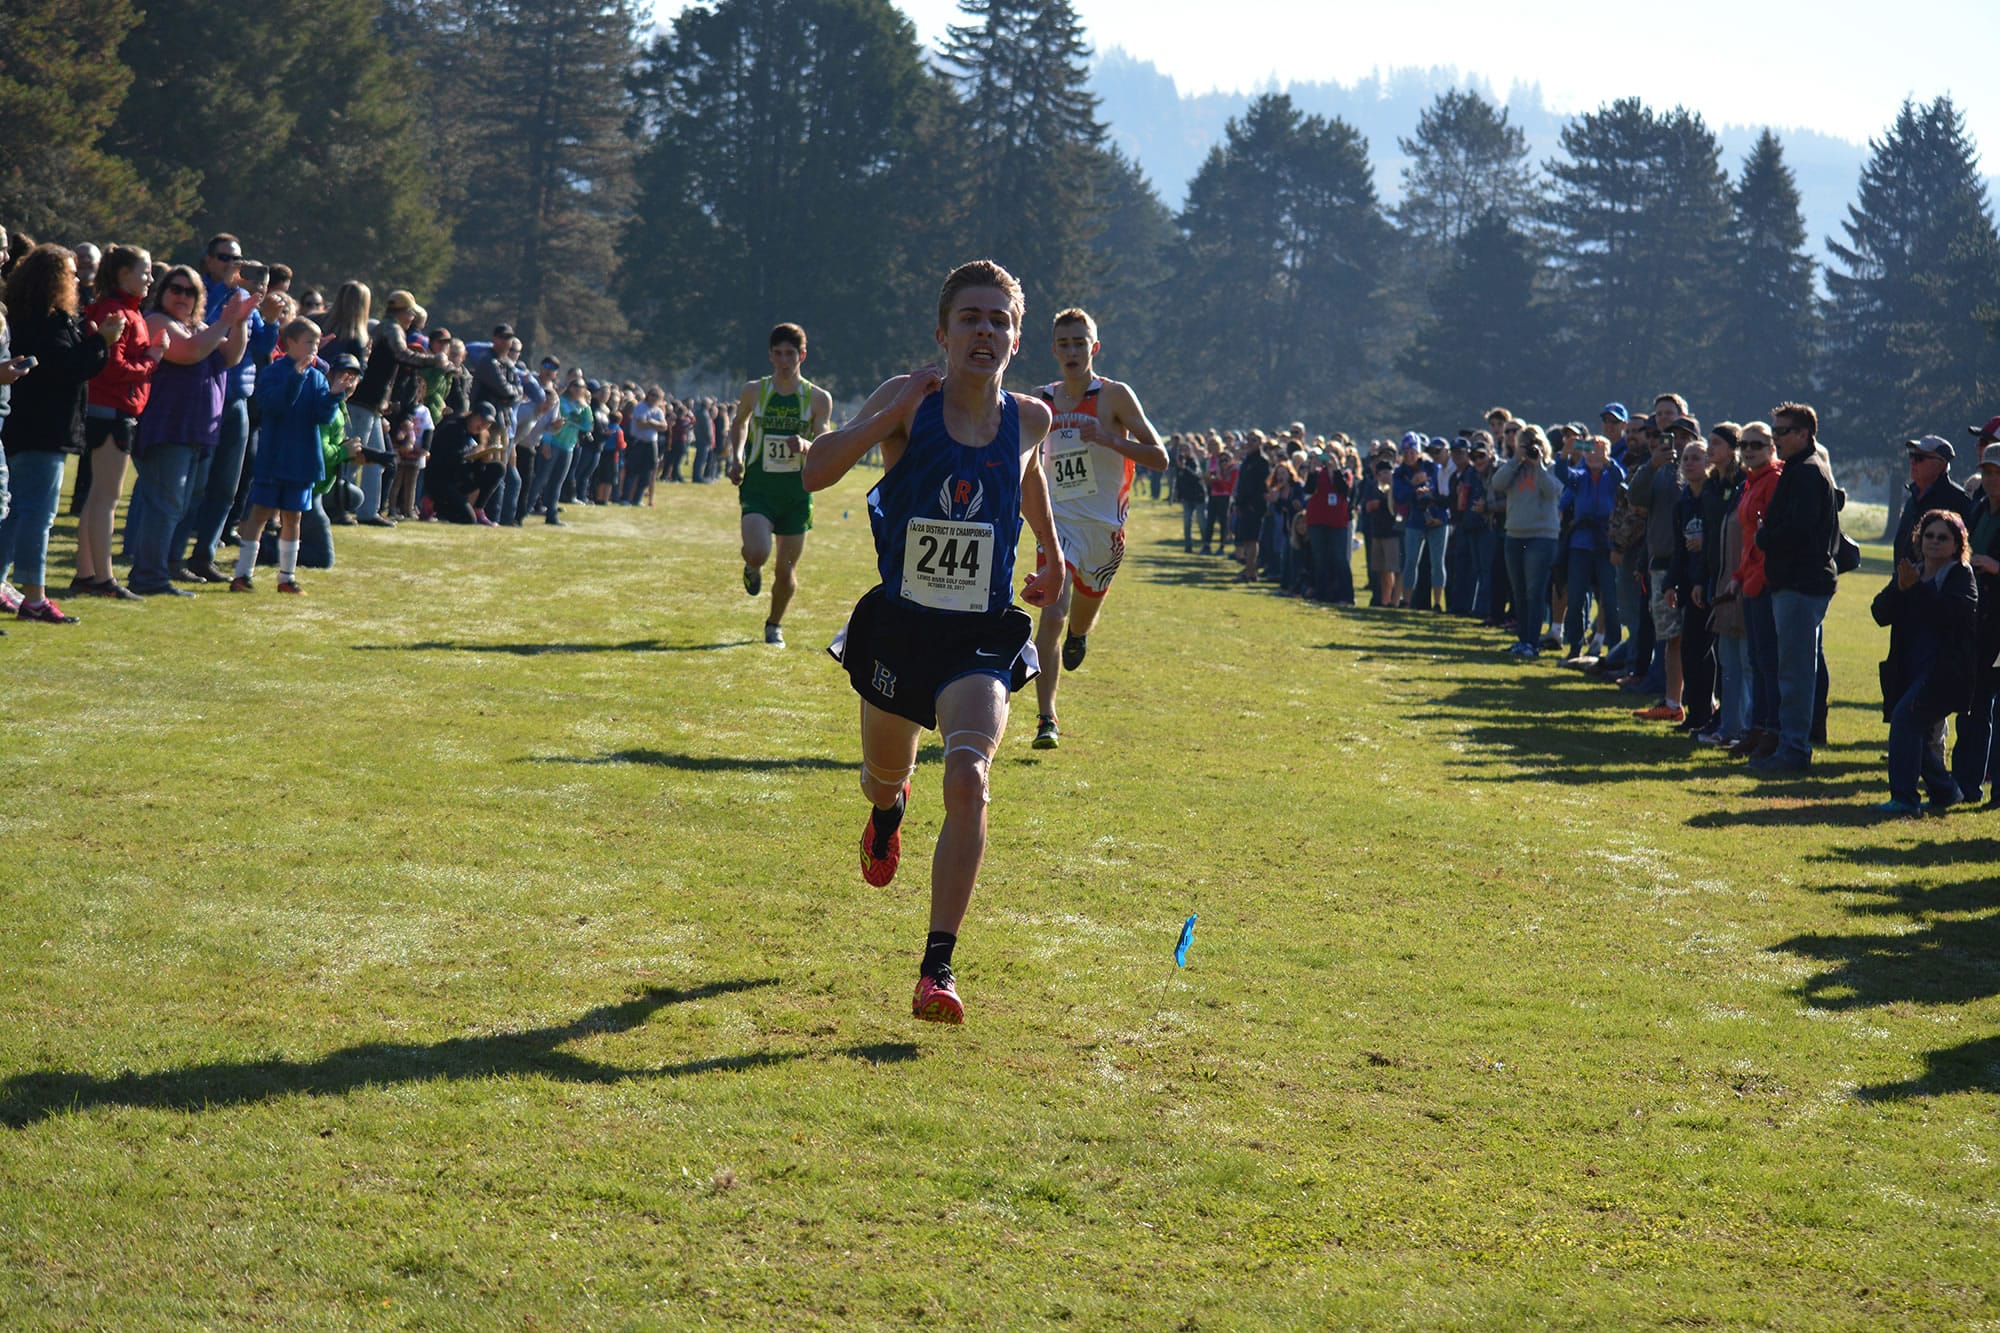 Kyle Radosevich of Ridgefield kicks to the finish line to win the 2A district cross country title on Saturday, Oct. 28, 2017, at Lewis River Golf Course in Woodland.